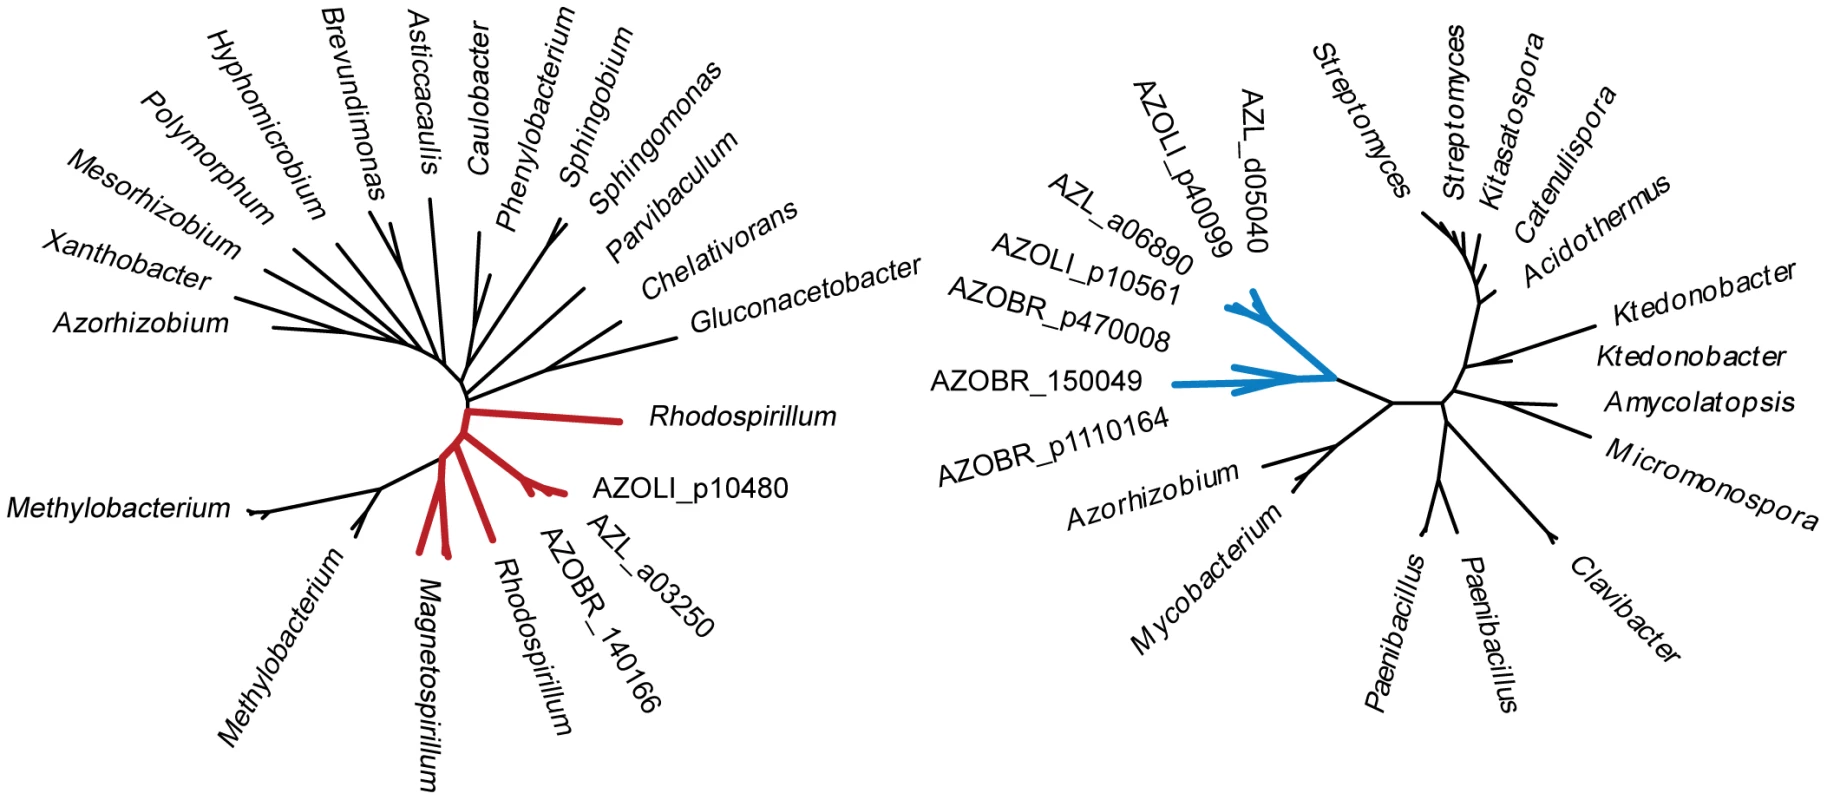 Phylogenetic trees for thiamine synthetase (left) and cellulase (right).